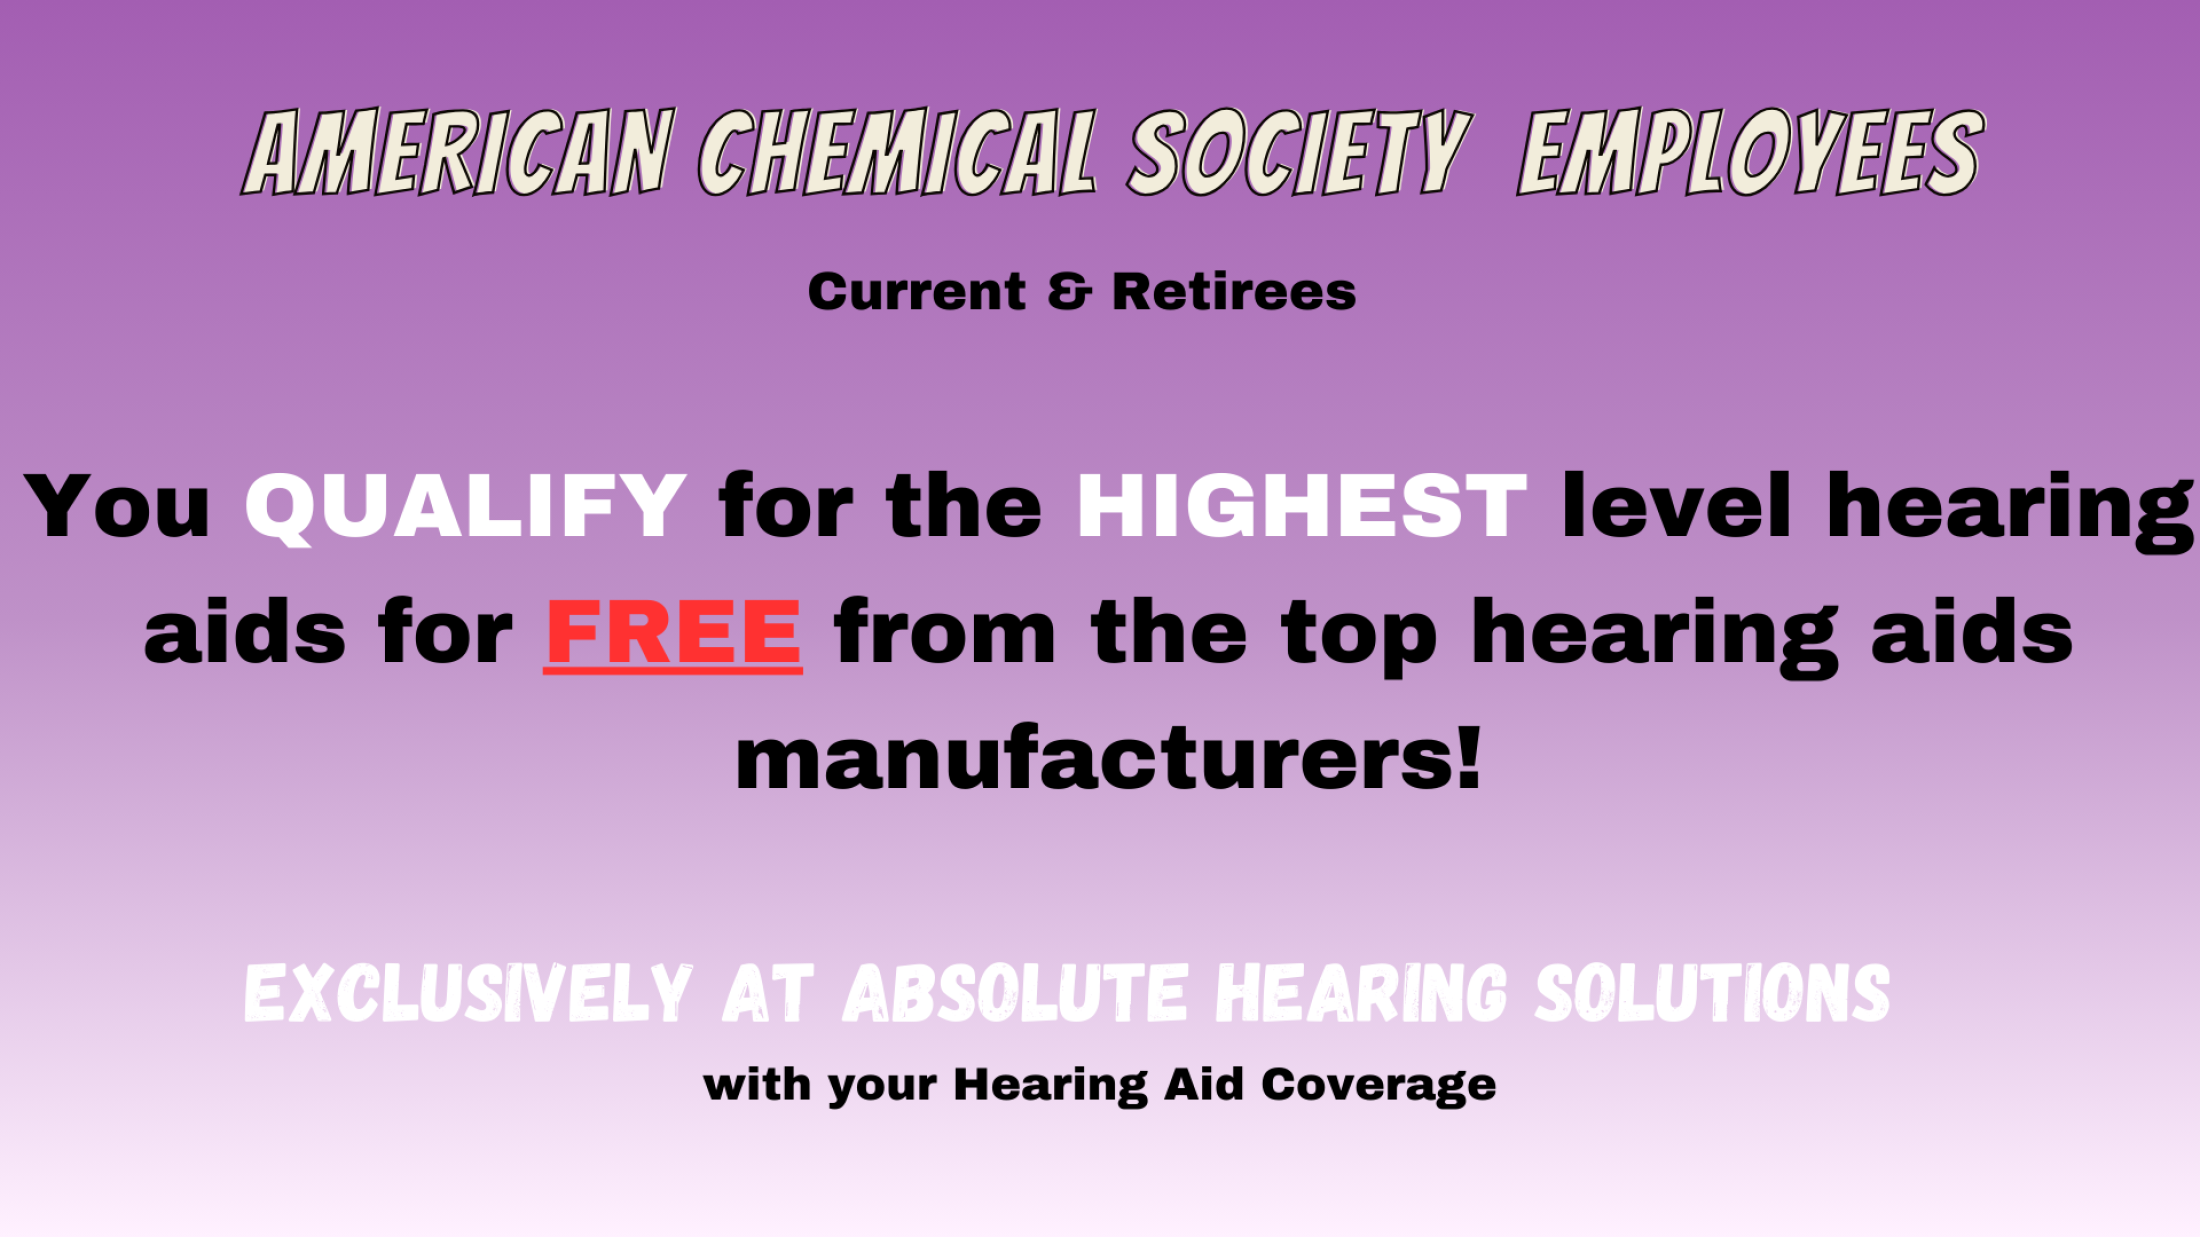 If you are an employee of the American Chemical Society, you get Free highest level hearing aids with Absolute Hearing Solutions